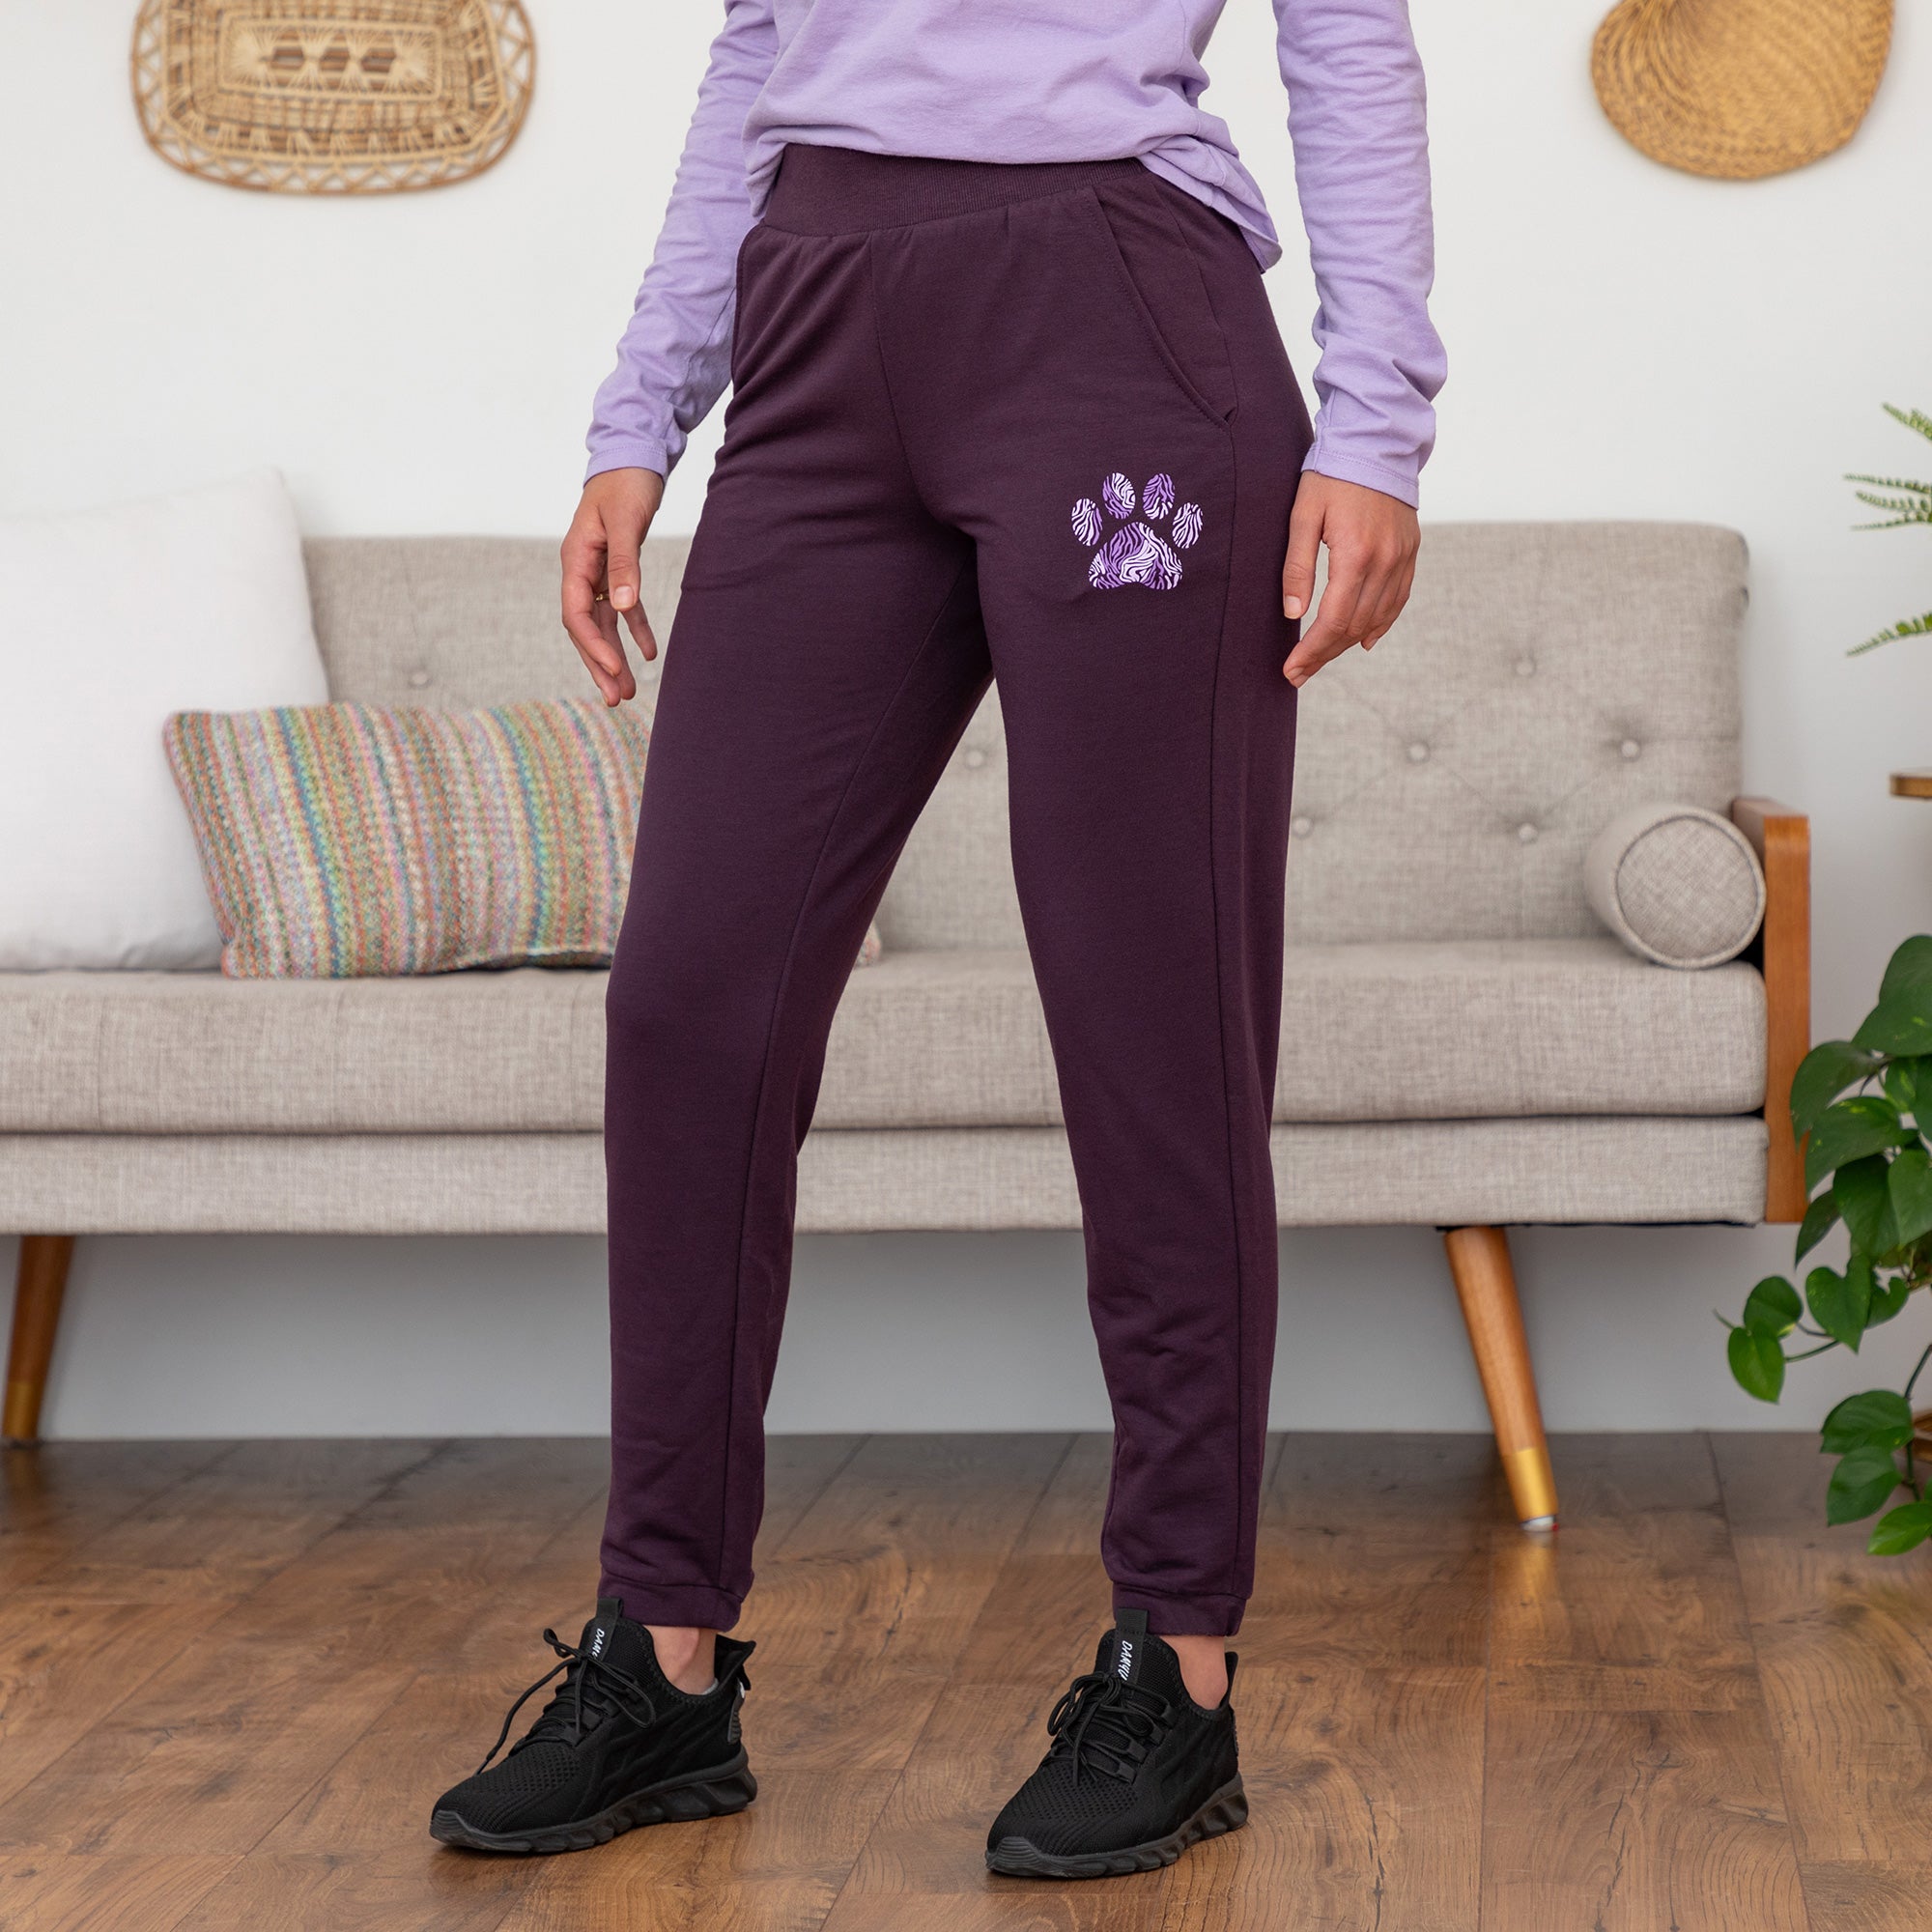 Paw Print Lightweight Tapered Sweatpants With Pockets & Elastic Waist - 2X